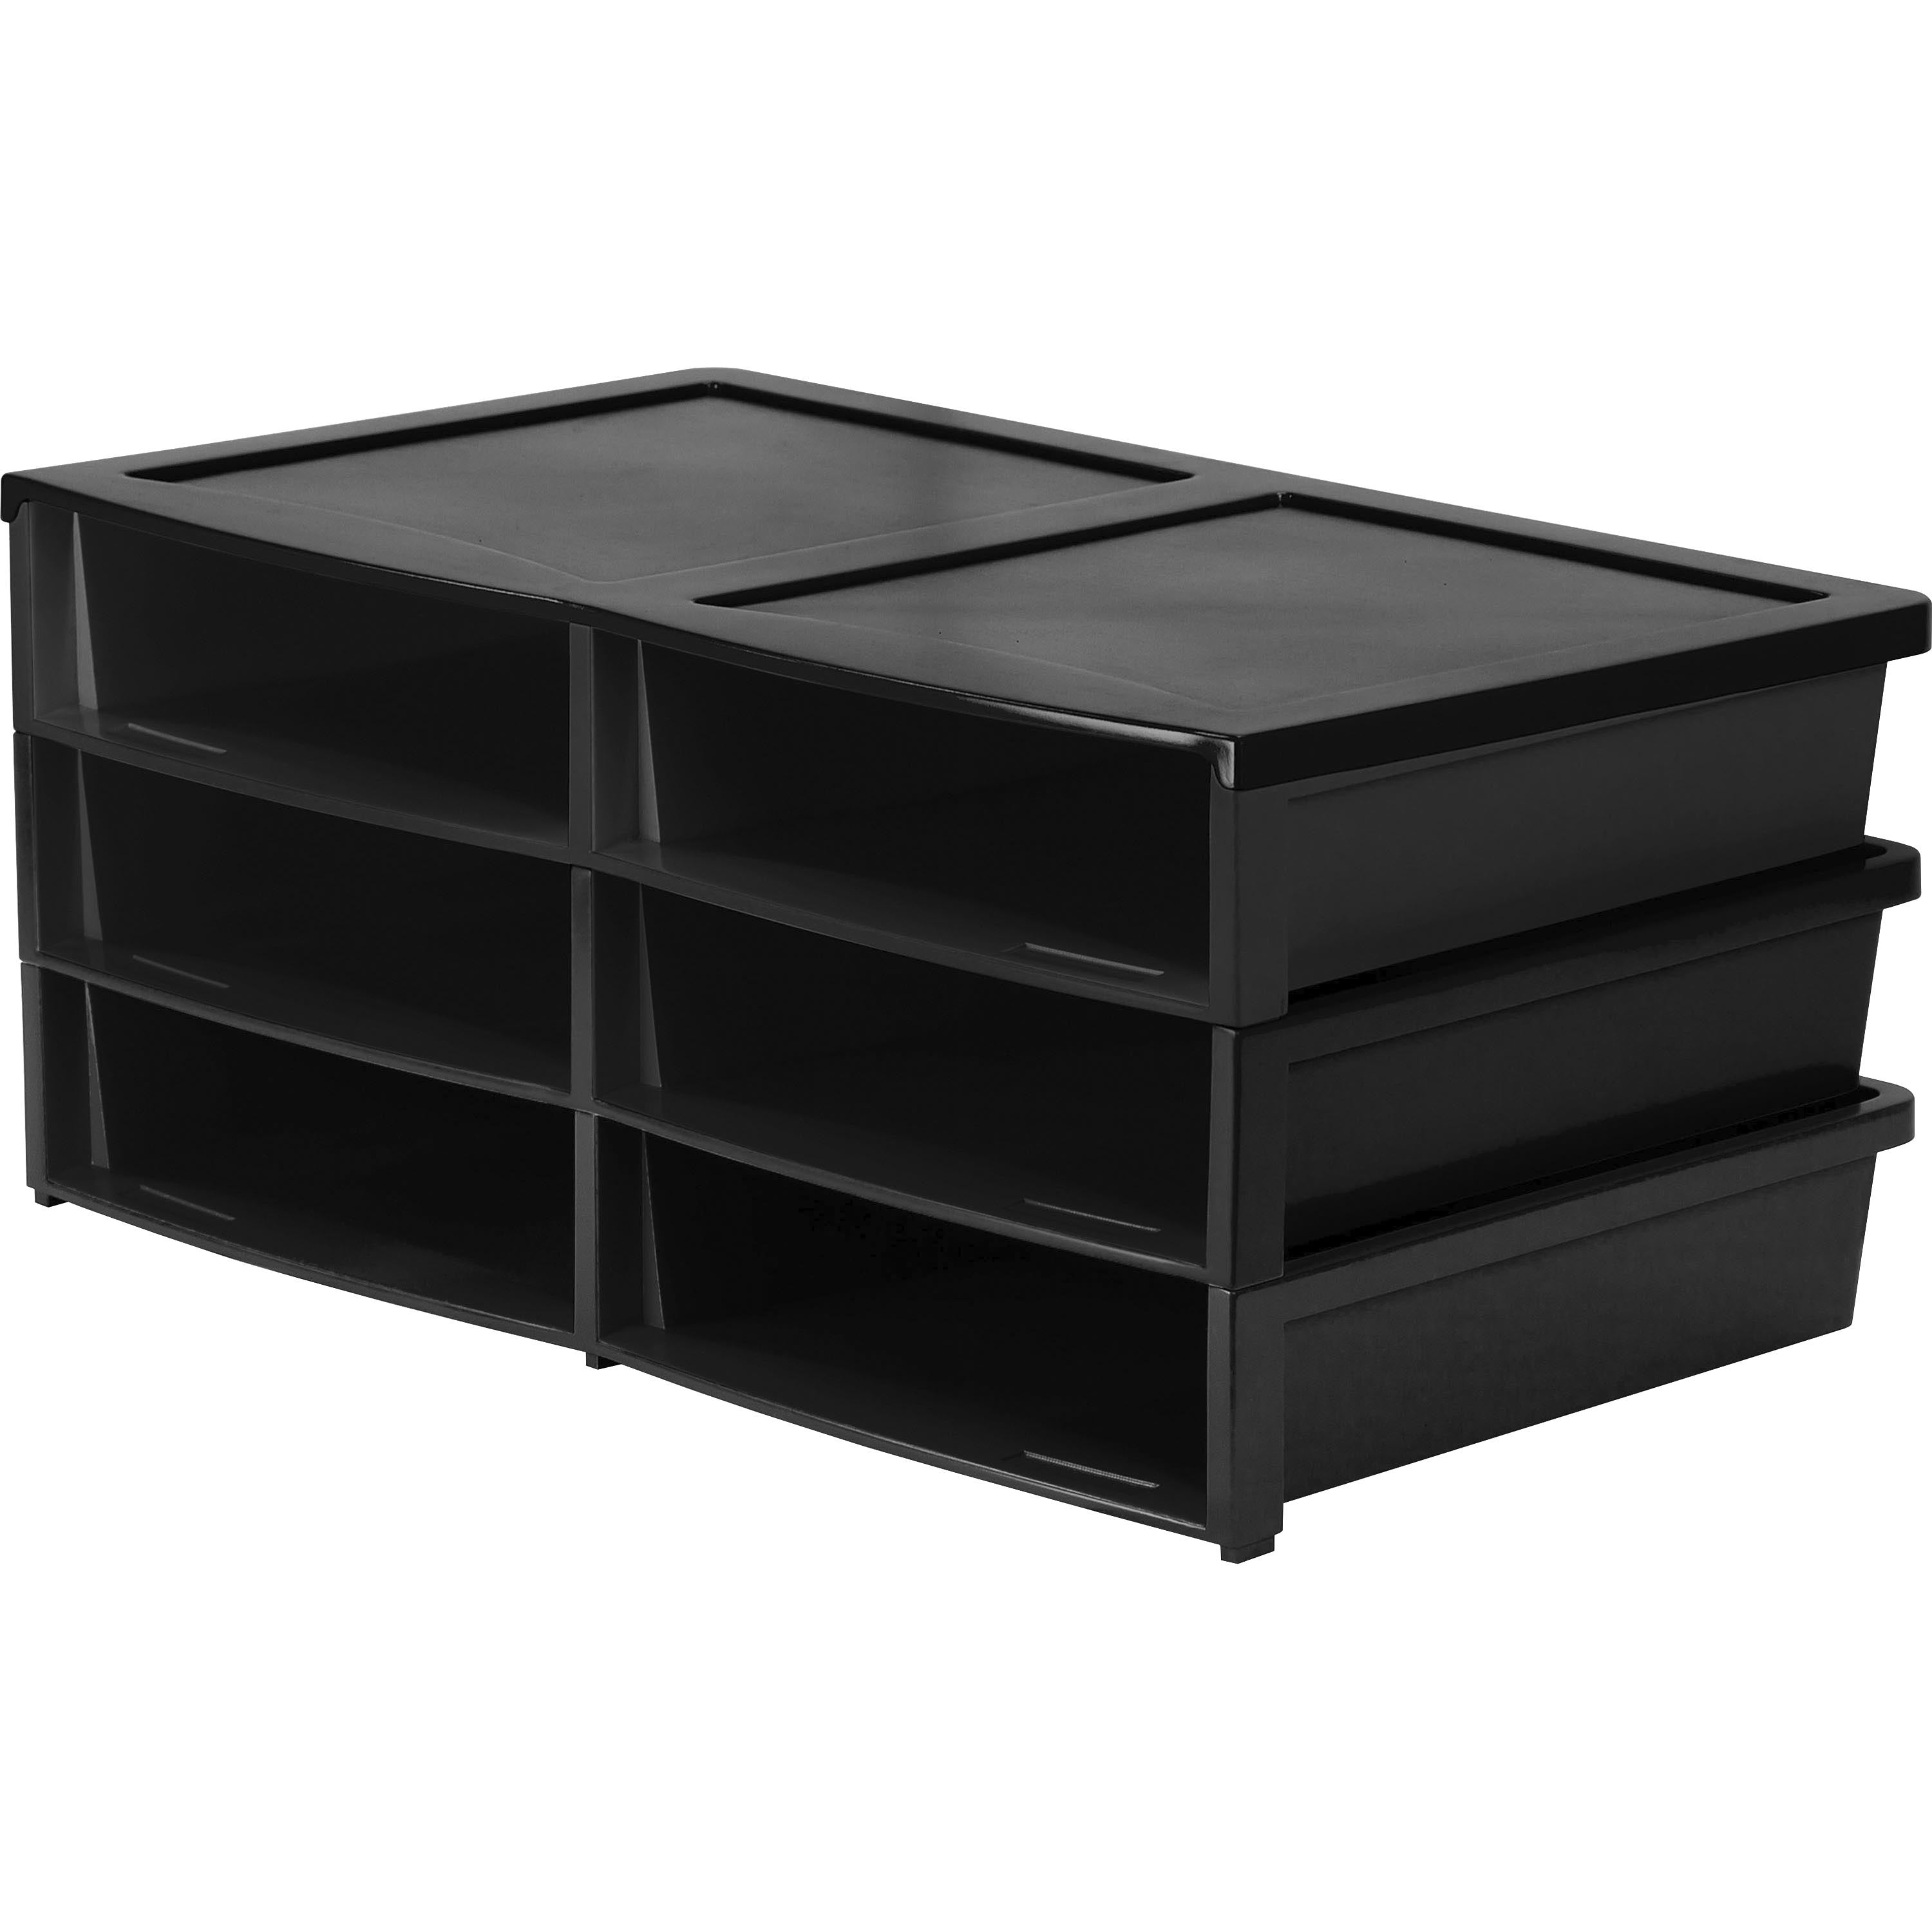 storex-quick-stack-6-sorter-organizer-500-x-sheet-6-compartments-compartment-size-875-x-1150-x-2-87-height-x-136-width205-length-black-plastic-1-each_stx61446e01c - 2